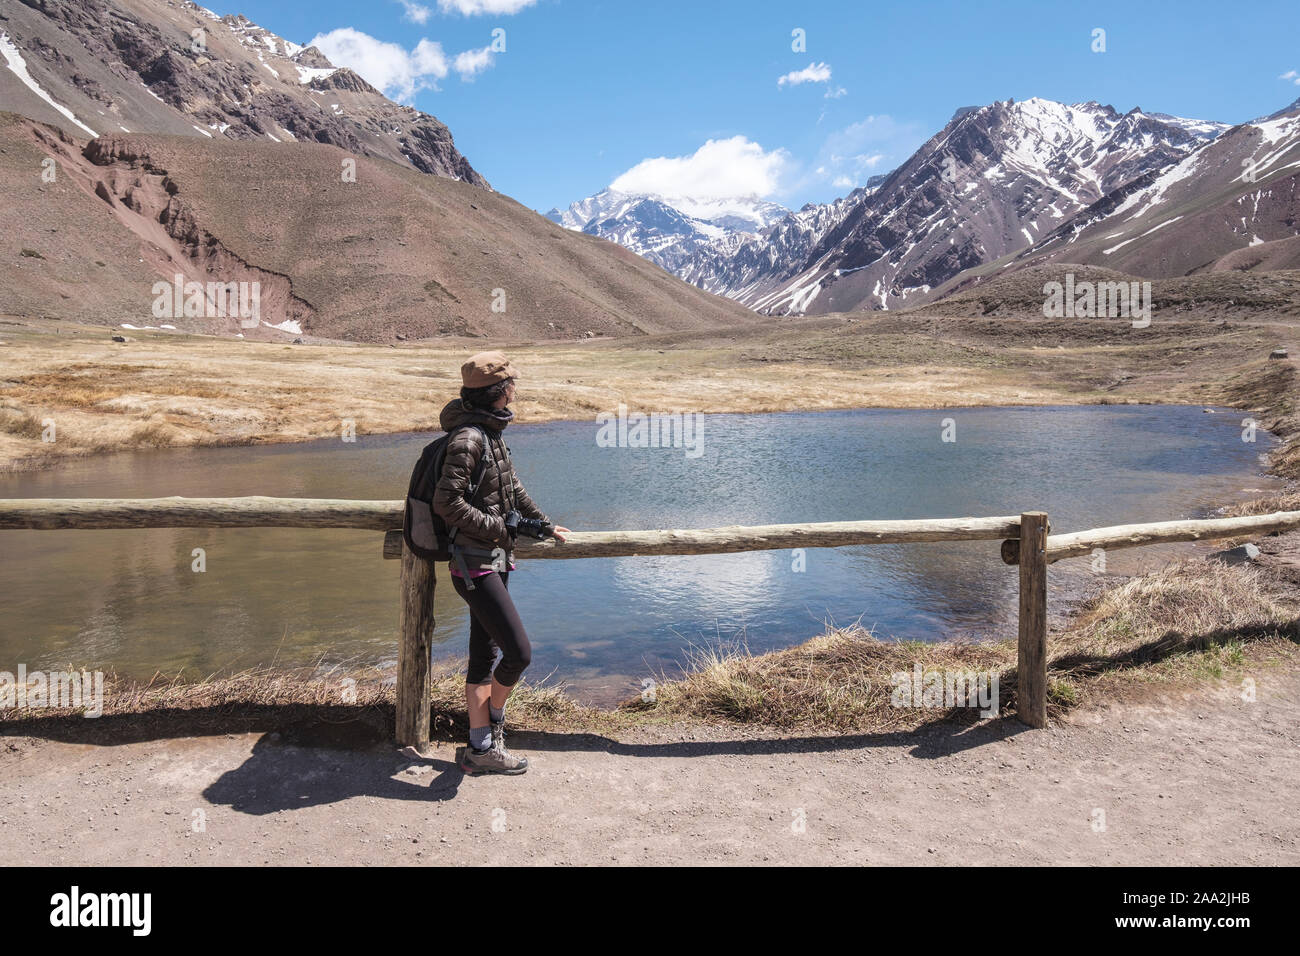 Female visitor on the Lagoon Los Horcones in the Aconcagua Park with the Mount Aconcagua in the background, Mendoza Province, Argentina Stock Photo